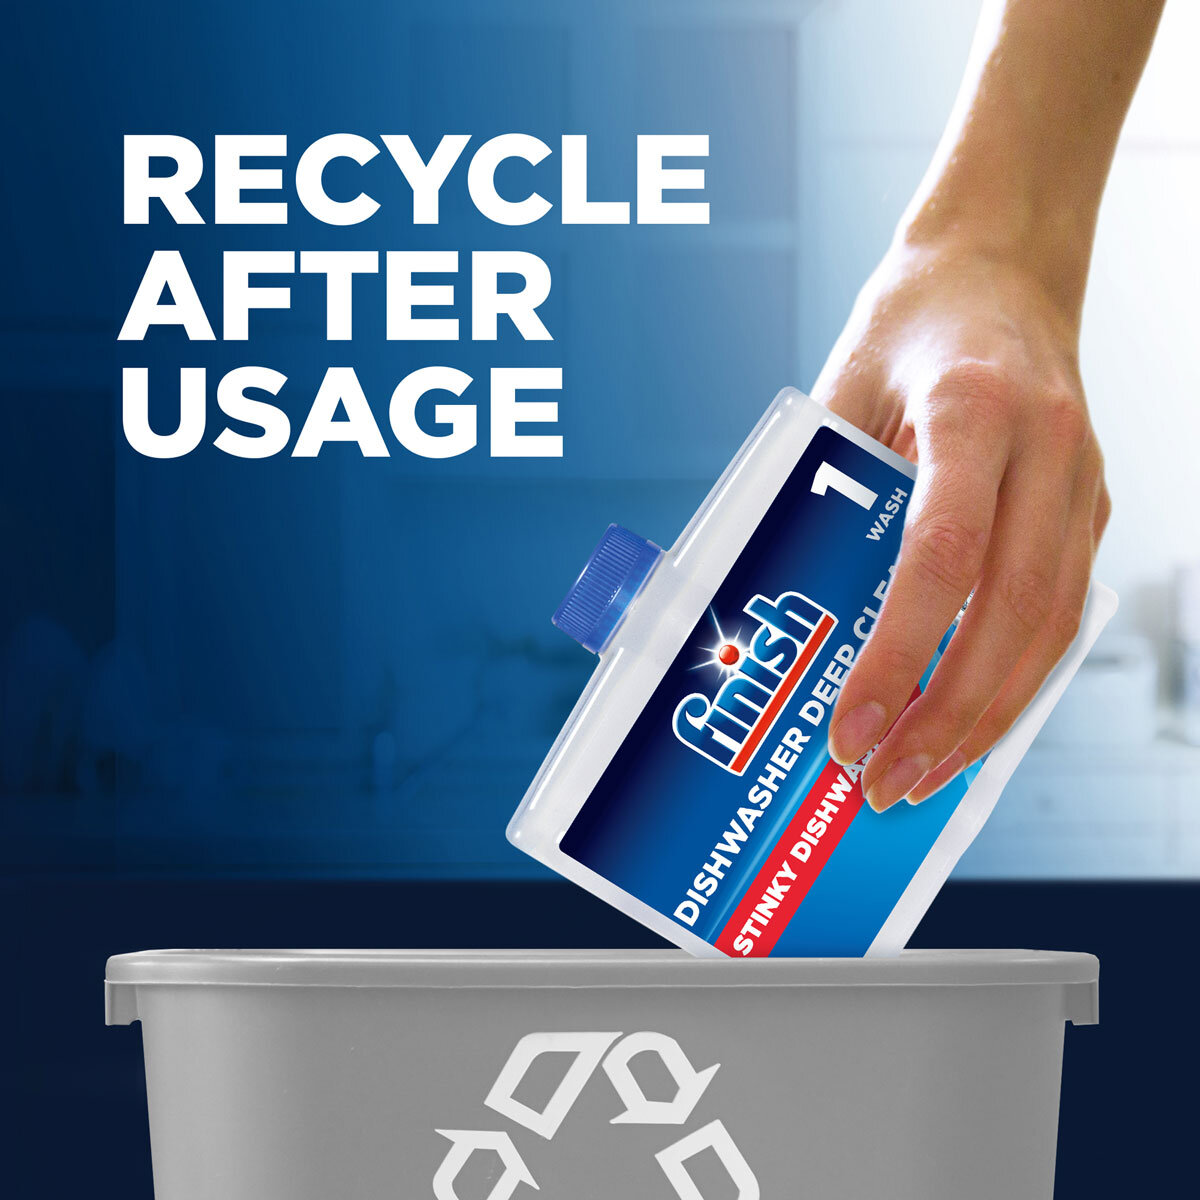 Recycle After Usage